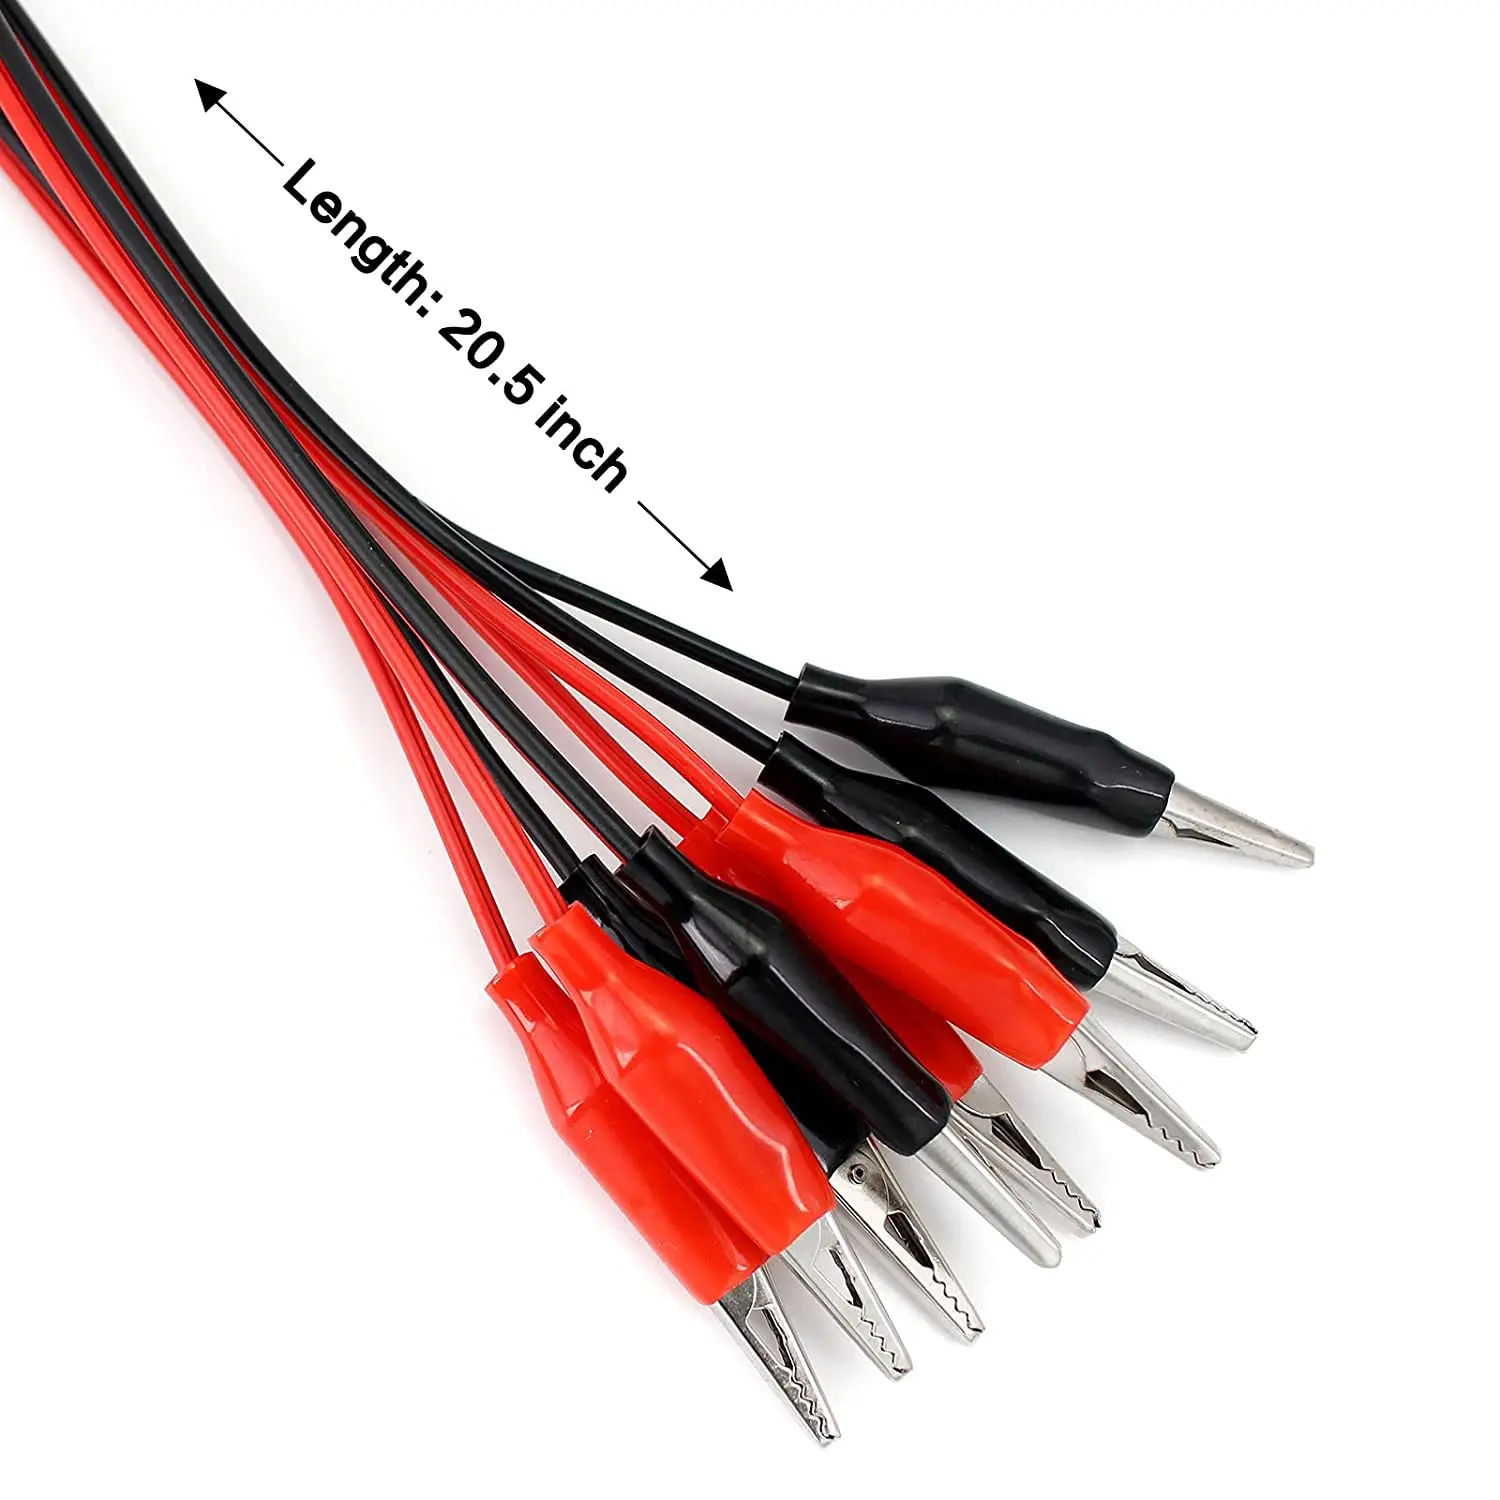 

12Pcs/set Connector Alligator Clip Test Leads Alligator Double-ended Crocodile Clips DIY Electrical Clamp Testing Wire Black Red